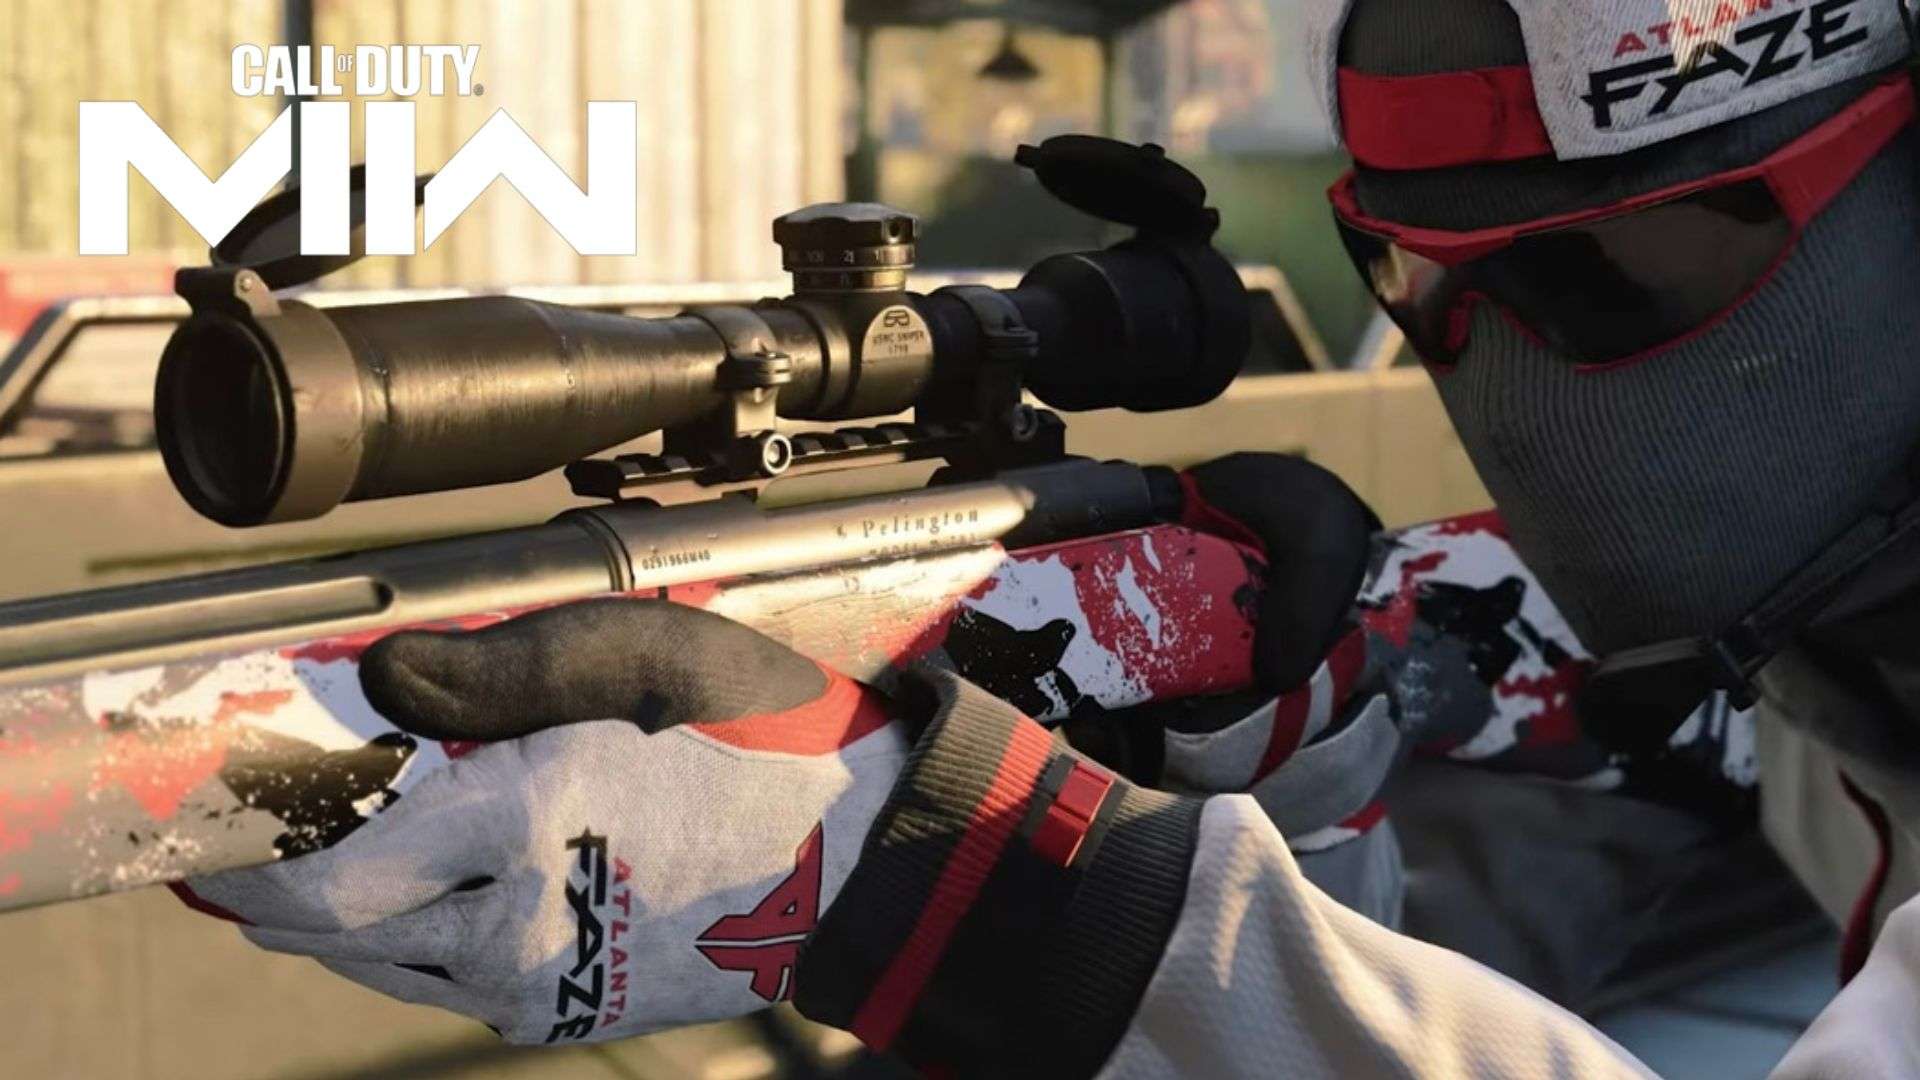 Call of Duty character in Atlanta FaZe skin with sniper